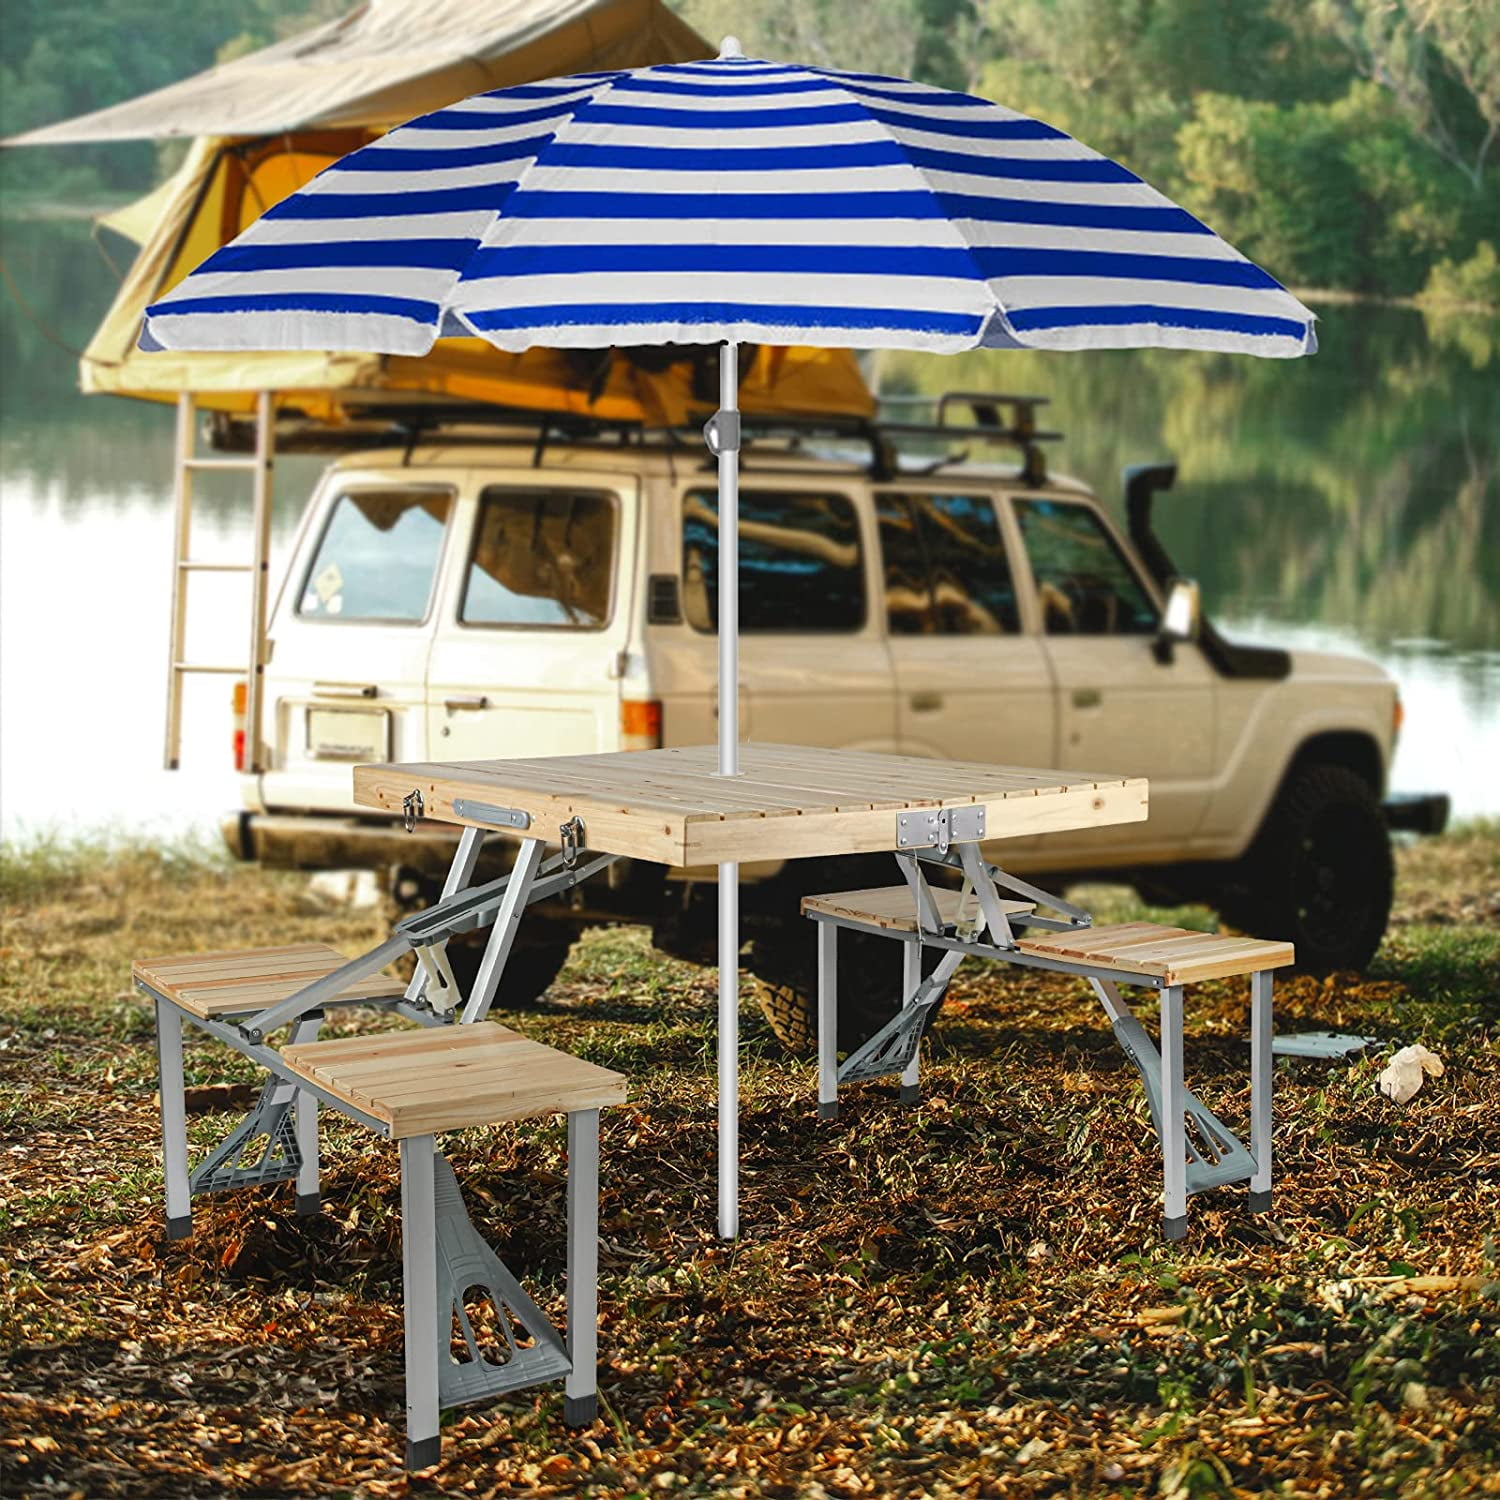 Lawn BIGTREE Picnic Table Folding Portable 4-Person Fold Up Travel Camping Table for Indoor Bamboo Table Garden Outdoor Travel Patio 